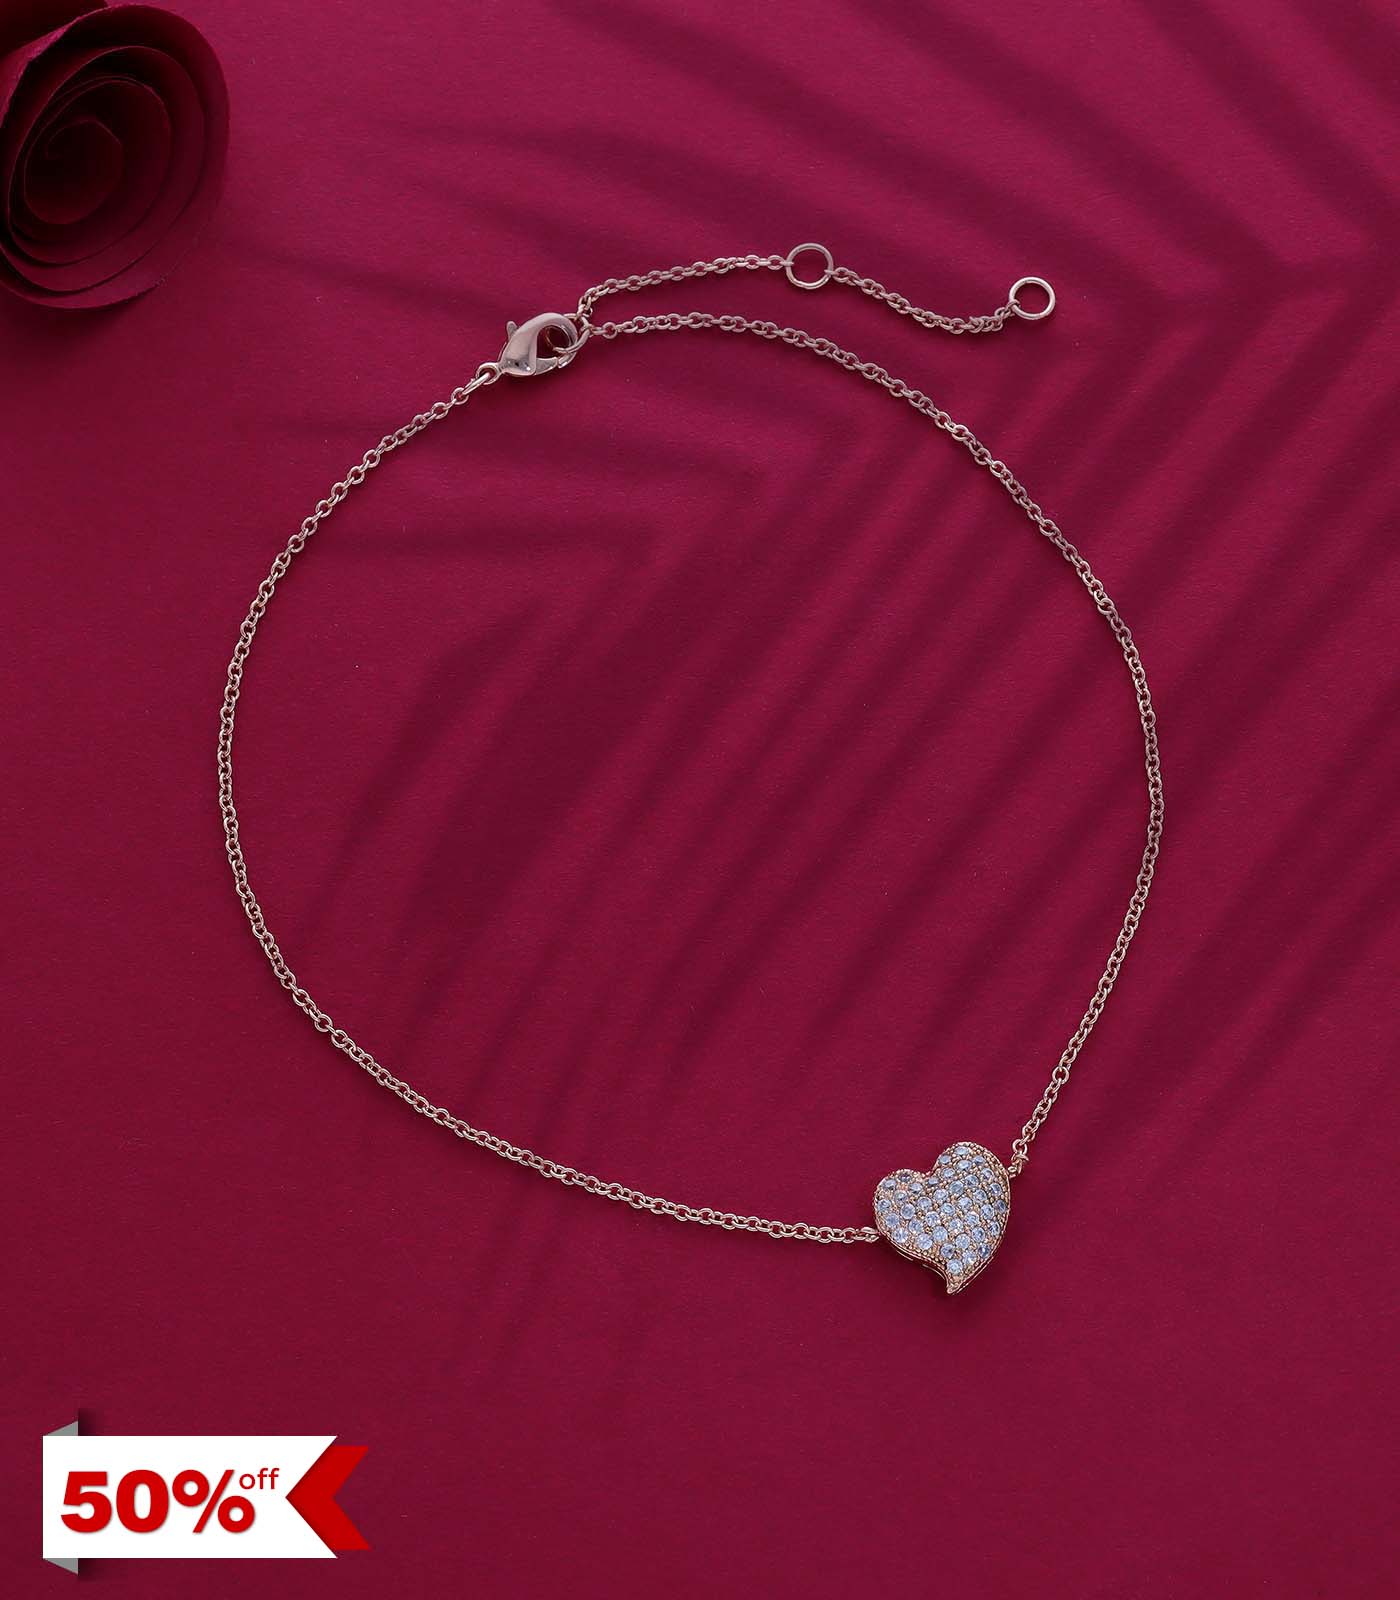 DAINTY HEART OF DESIRES ANKLET (BRASS)